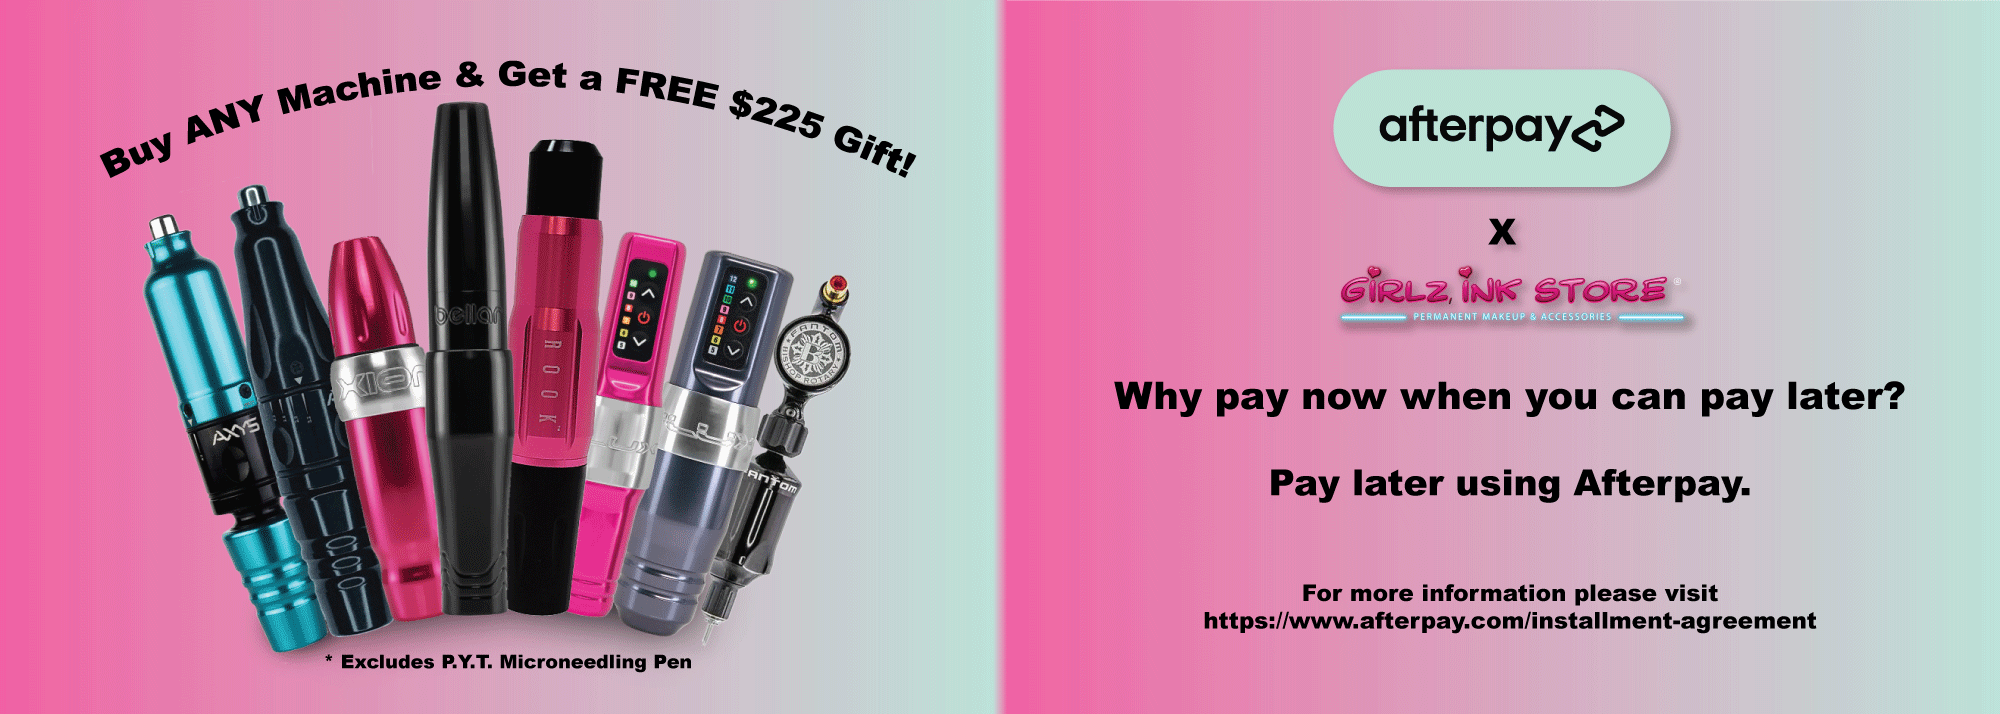 Text Reads: Buy ANY Machine & Get a FREE $225 Gift! Excluded PYT Microneedling Pen. Why pay now when you can pay later? Pay later using Afterpay. Visually shows Afterpay logo and a variety of PMU Machines. 